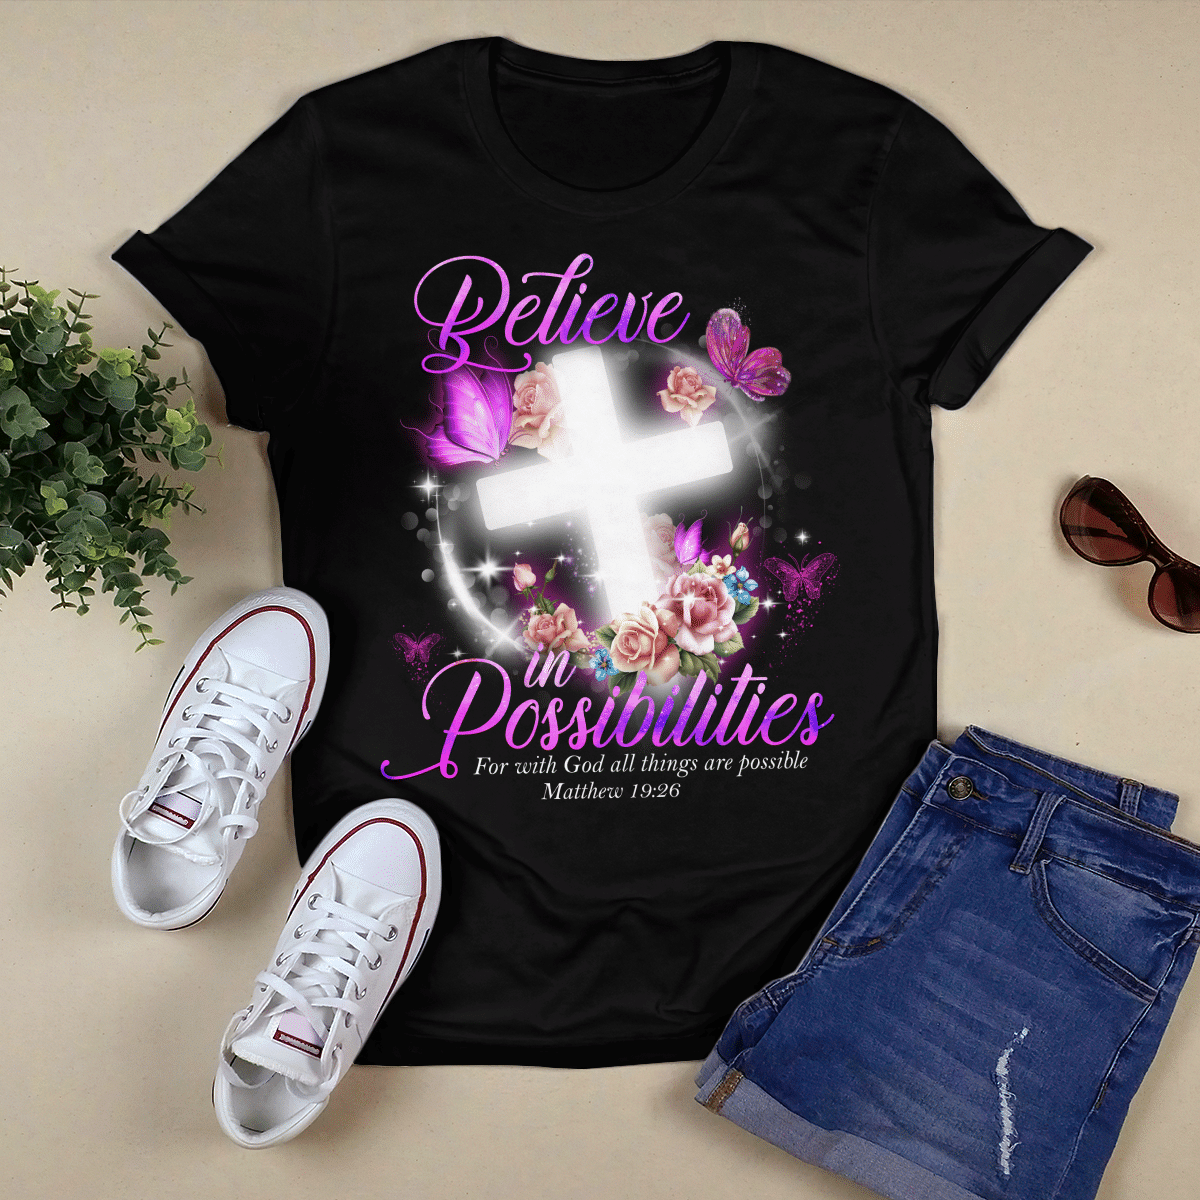 Believe In Possibilities - Cross And Flowers T-shirt - Jesus T-Shirt - Christian Shirts For Men & Women - Ciaocustom